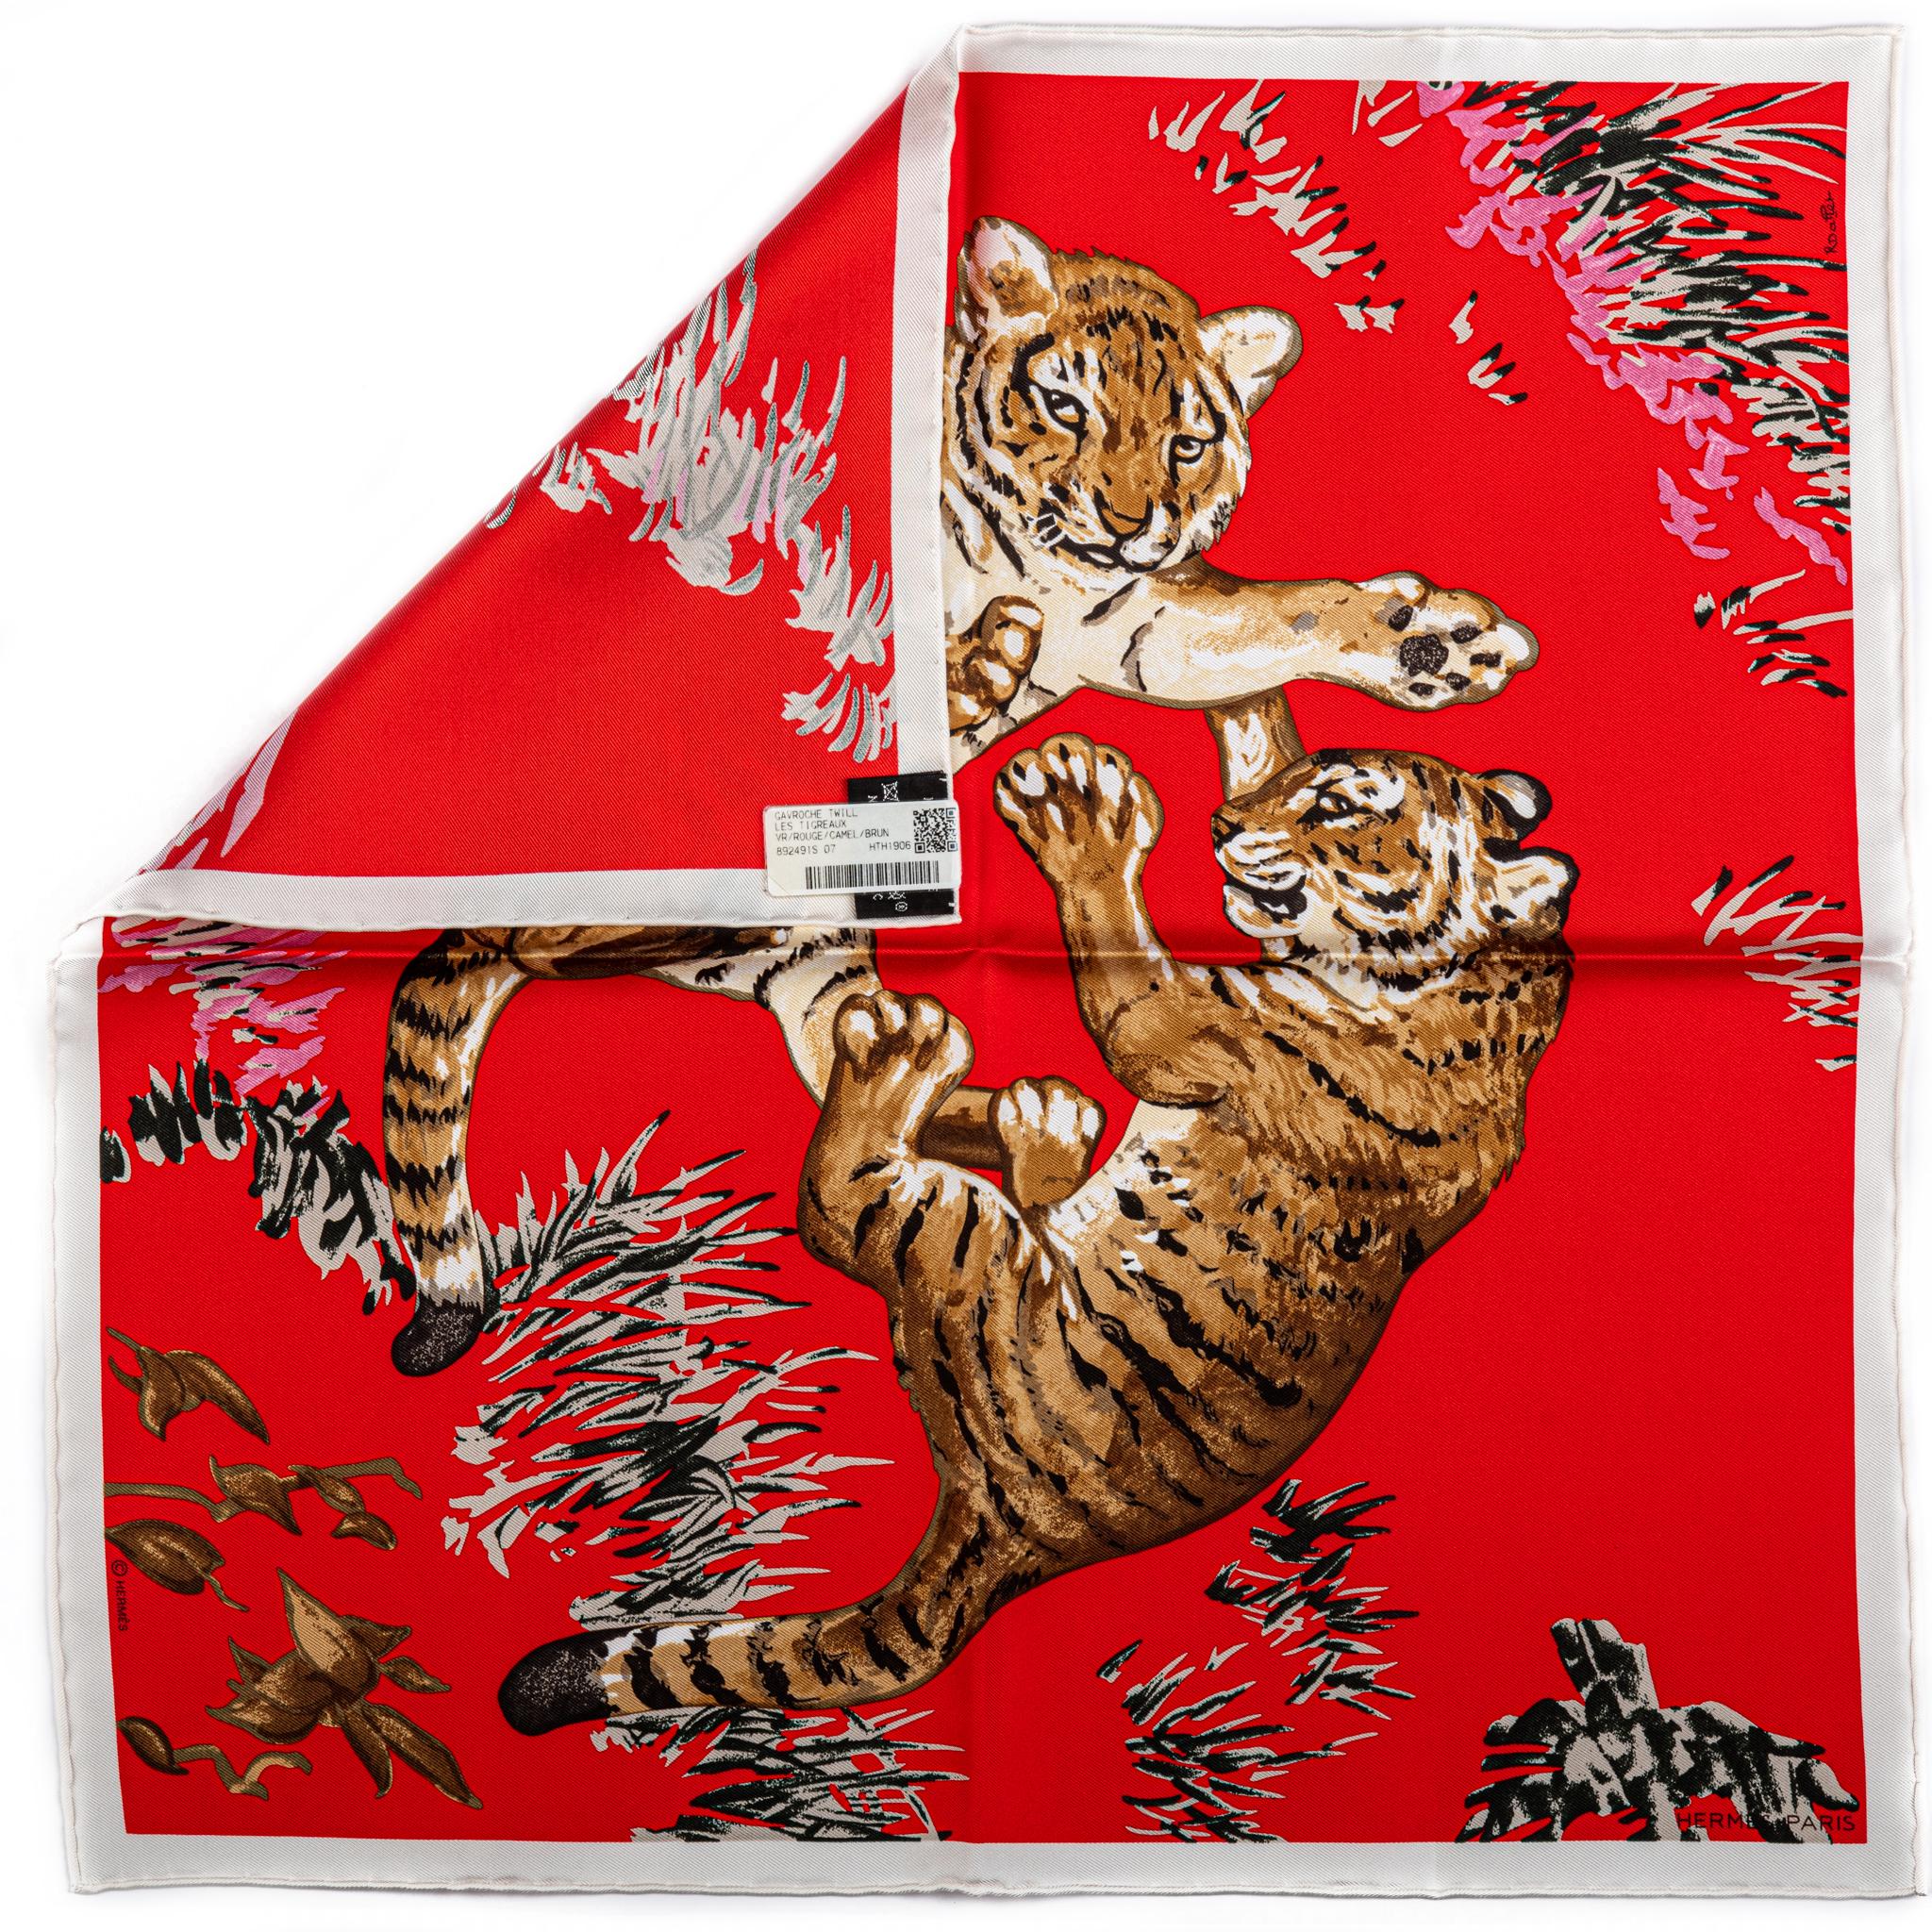 New Hermès Red Tiger Cubs Silk Gavroche Scarf in Box In New Condition For Sale In West Hollywood, CA